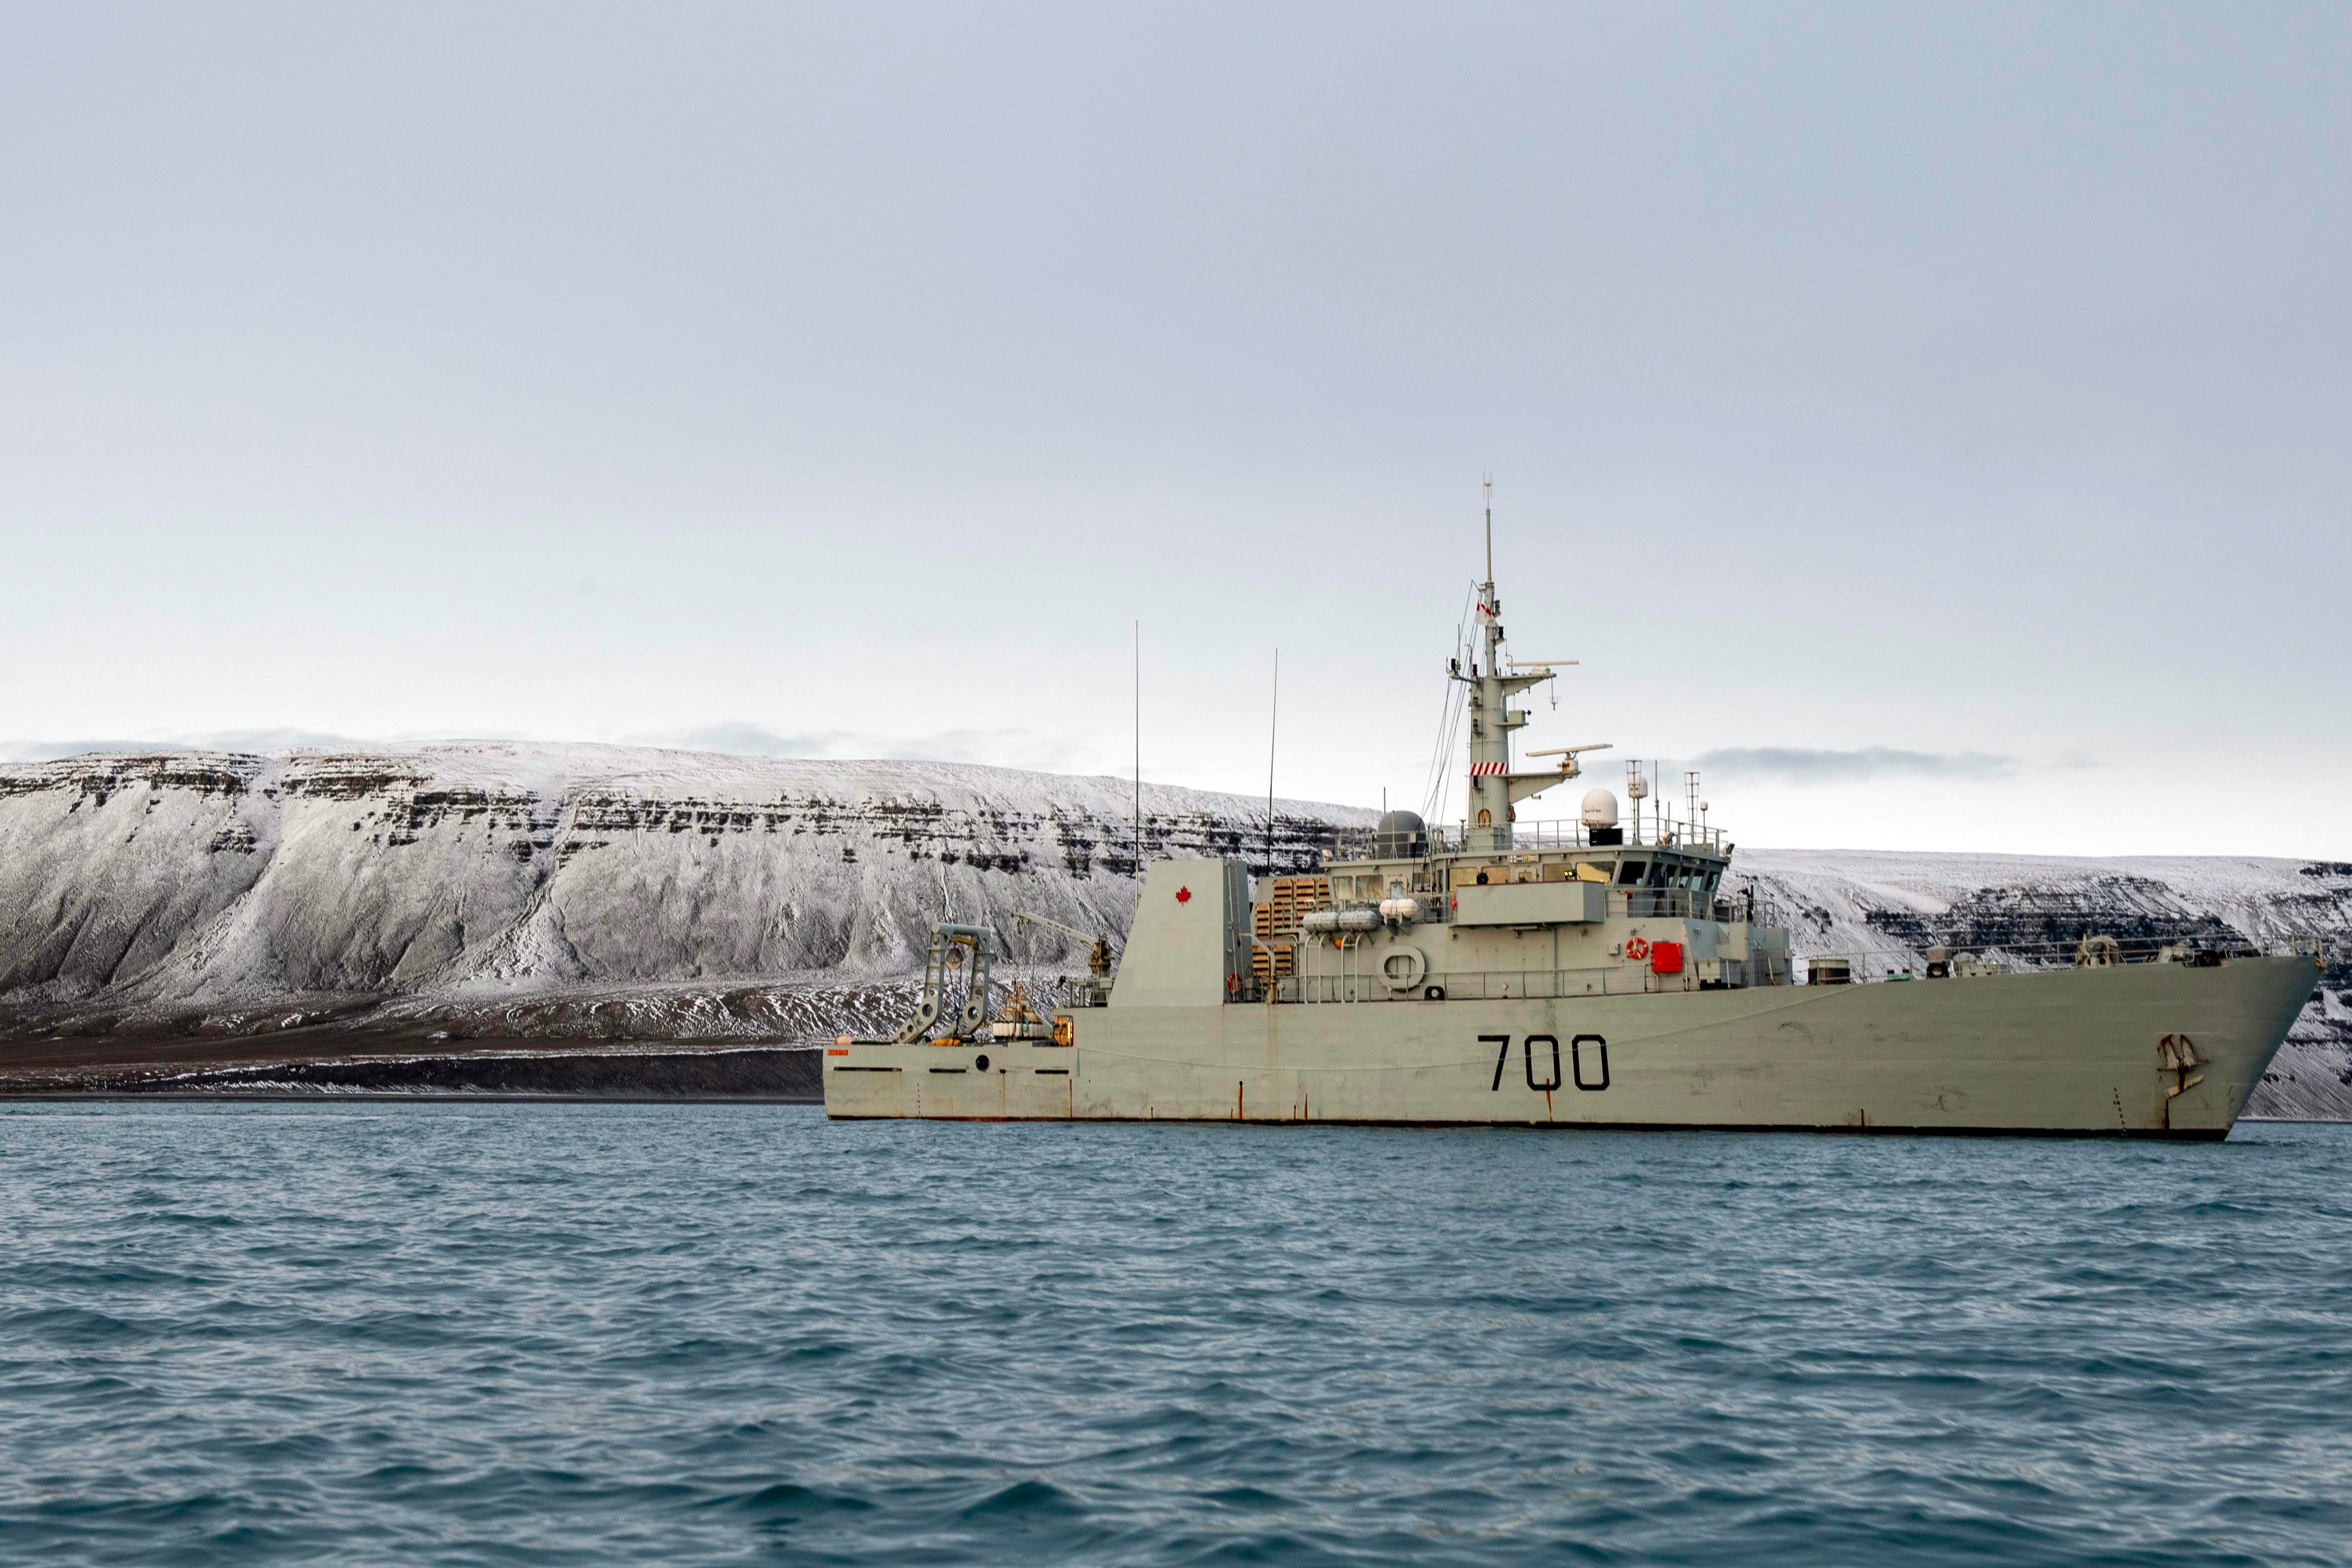 Canada's HMCS Kingston sails in Lancaster Sound, close to Gascoyne Inlet during Operation Nanook on August 29, 2019. During Operation Nanook, the Canadian Armed Forces practice guarding the country's sovereignty over its northernmost regions and improving the way it operates in Arctic conditions. (Cpl. Simon Arcand/Canadian Armed Forces)